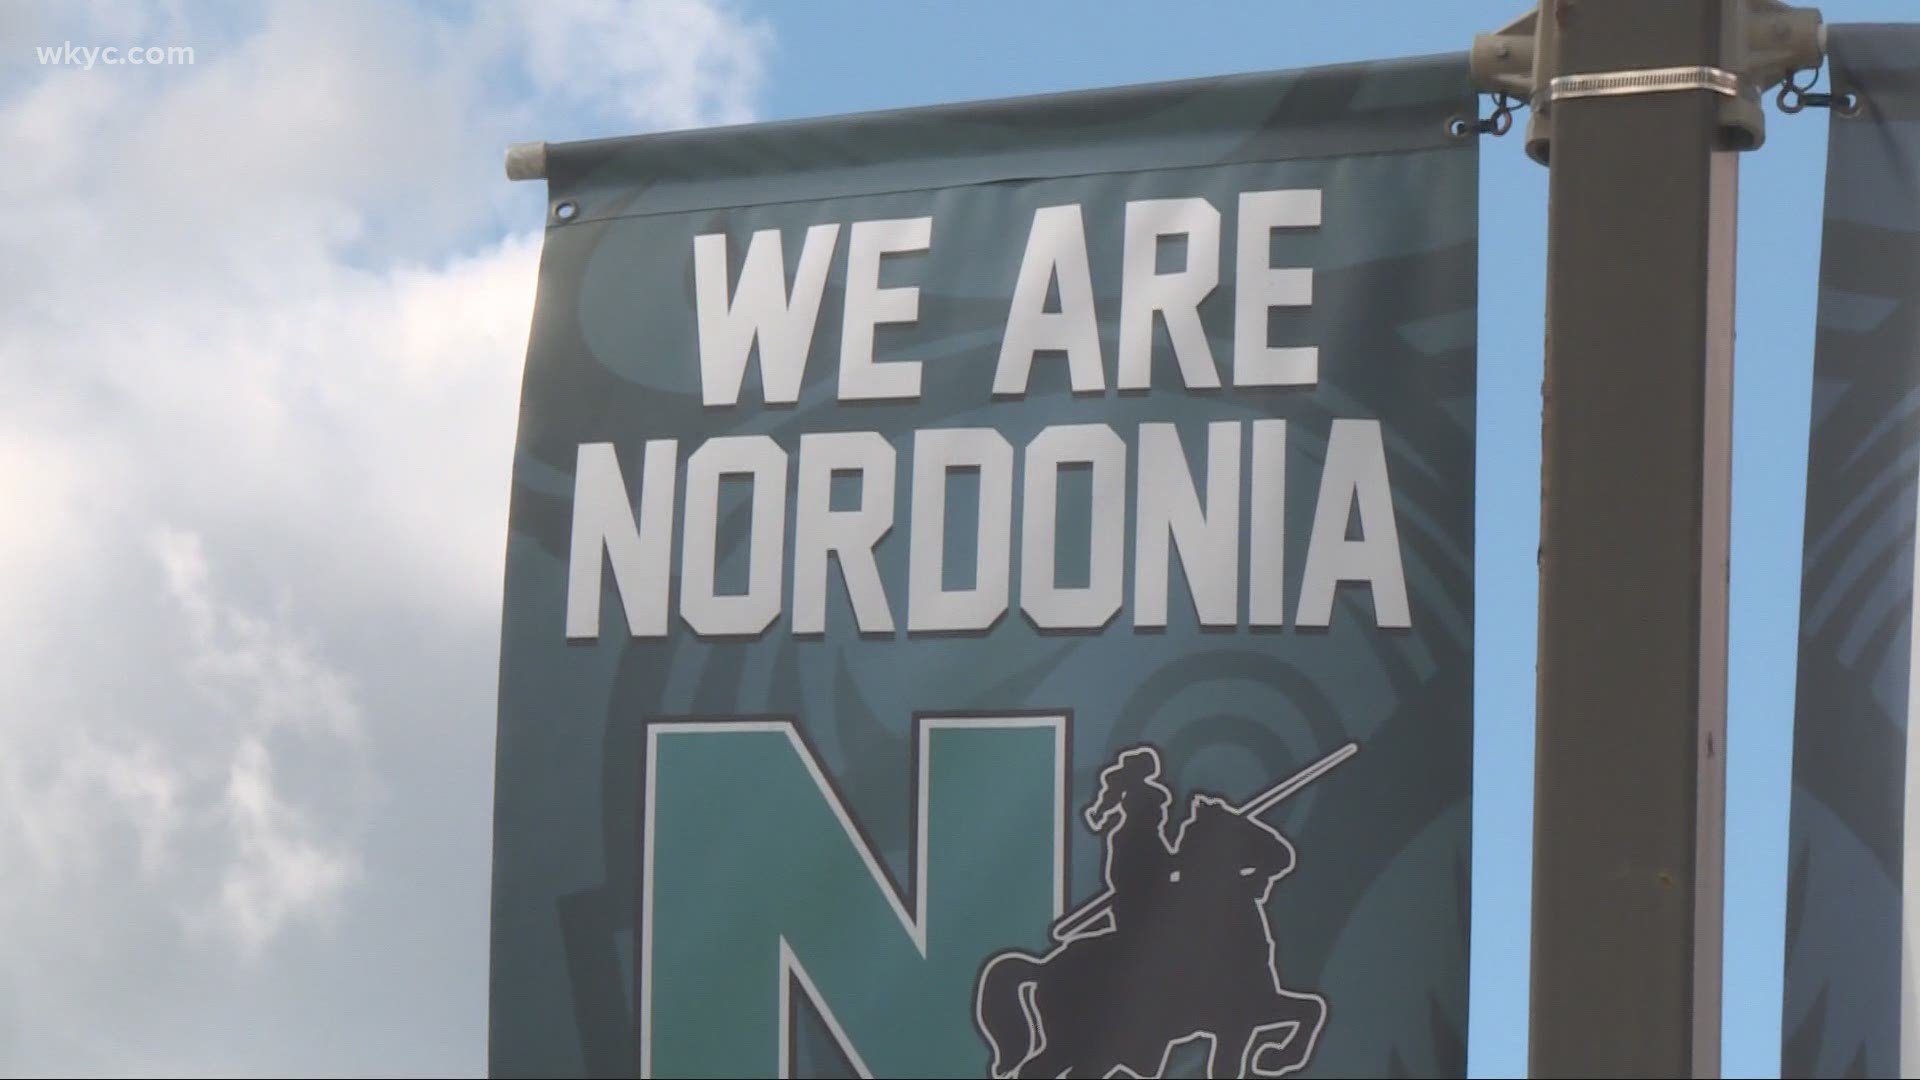 The coach made an 'inappropriate joke" to a player on the football team.  Tiffany Tarpley has the latest from Nordonia High School in Macedonia.